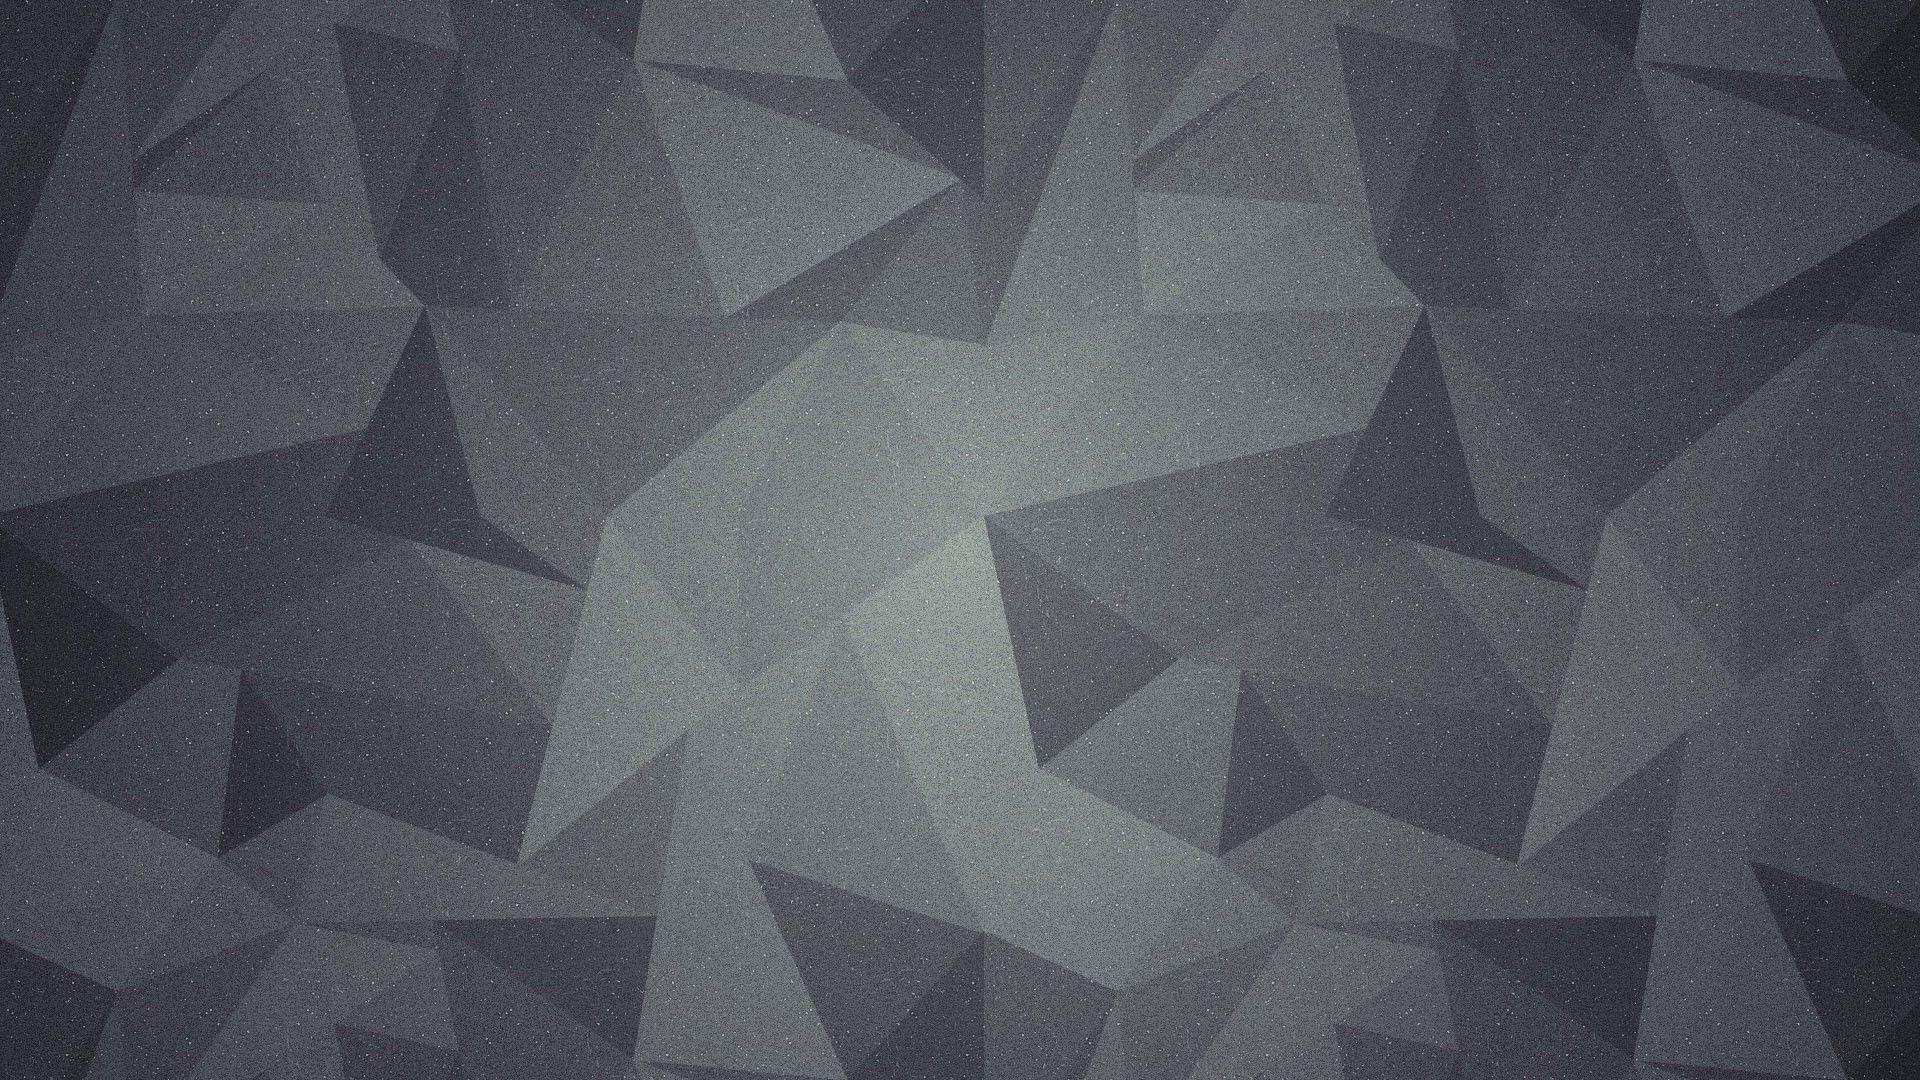 Black And Grey HD Wallpapers - Wallpaper Cave